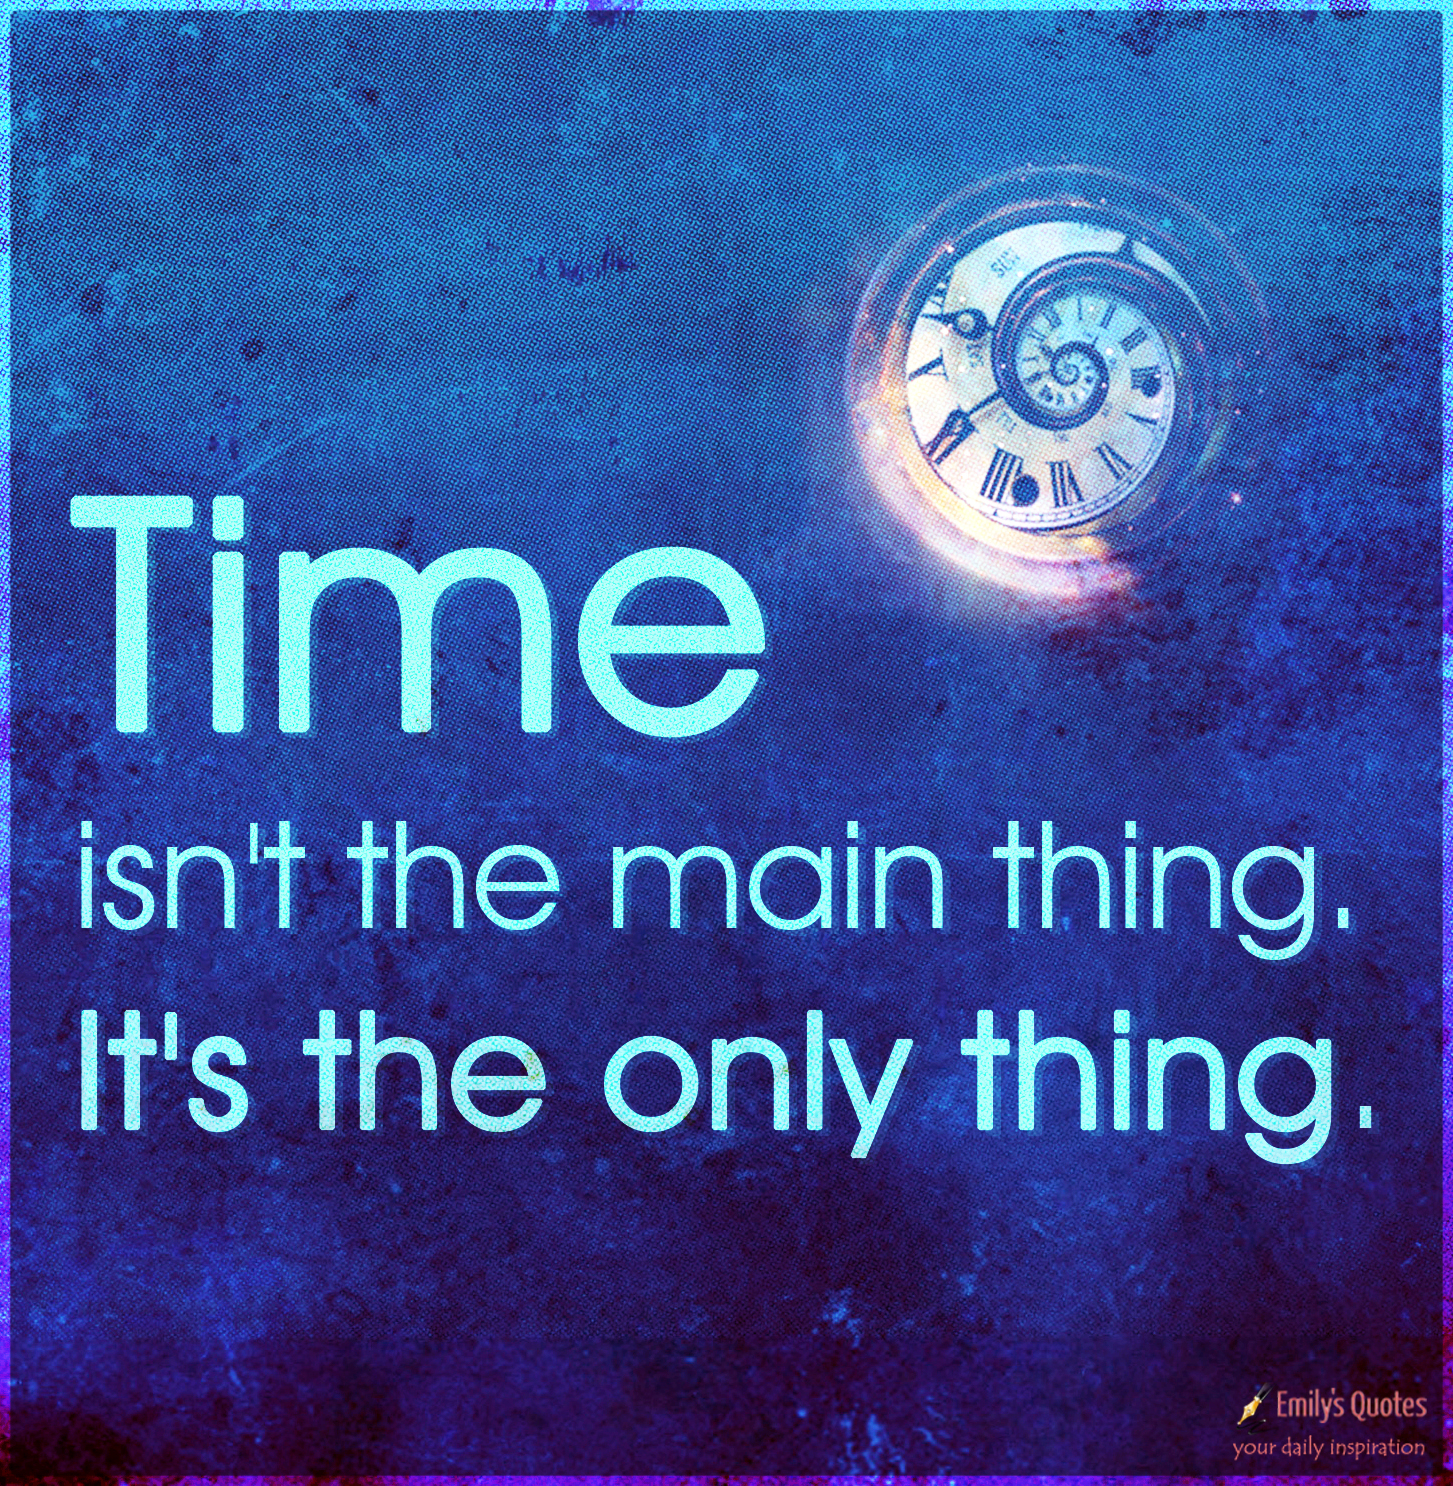 Time isn’t the main thing. It’s the only thing